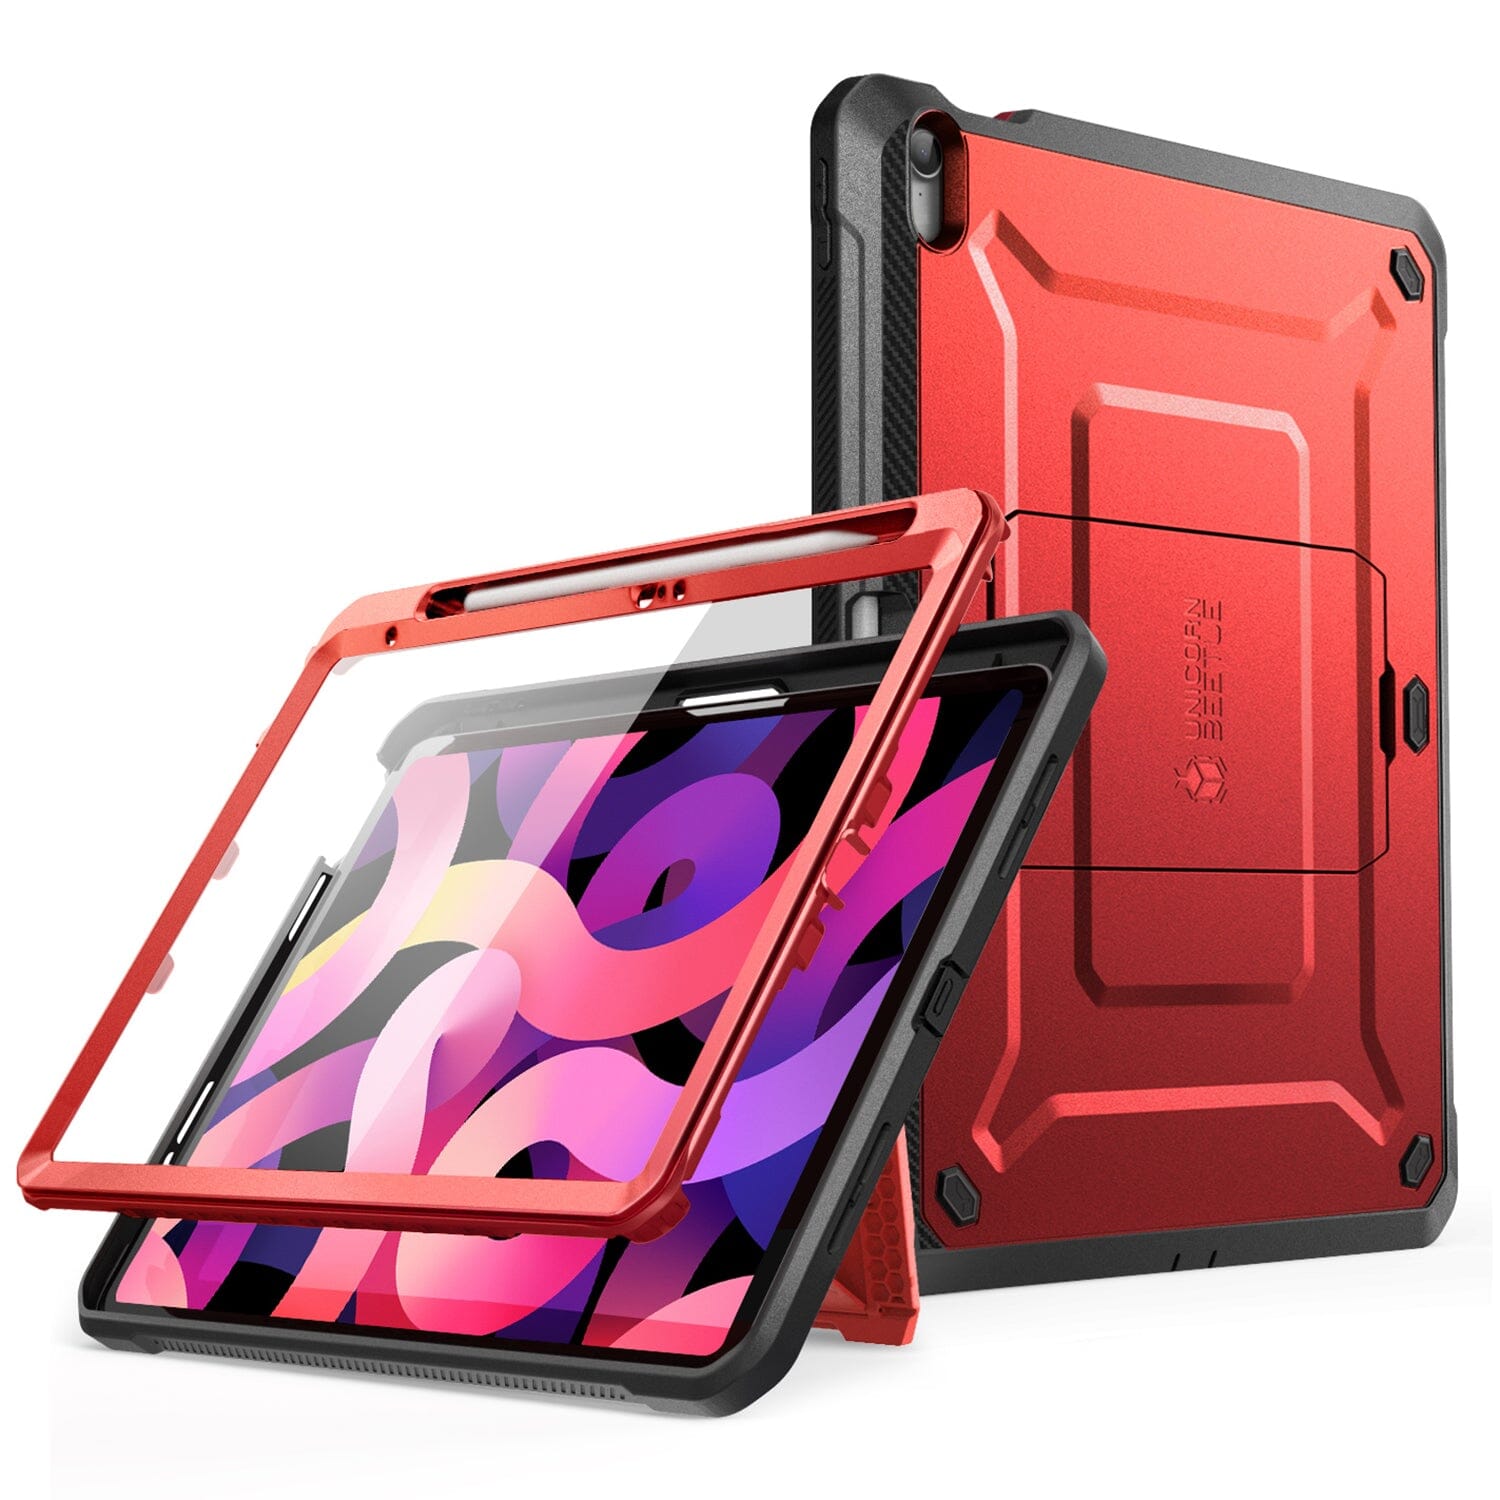 SUPCASE Unicorn Beetle Pro Series Case Designed for iPad 10th Generation, with Built-in Screen Protector and Dual Layer Full Body Rugged Protective Case for iPad 10.9 Inch 2022 iPad Case Supcase Ruddy 